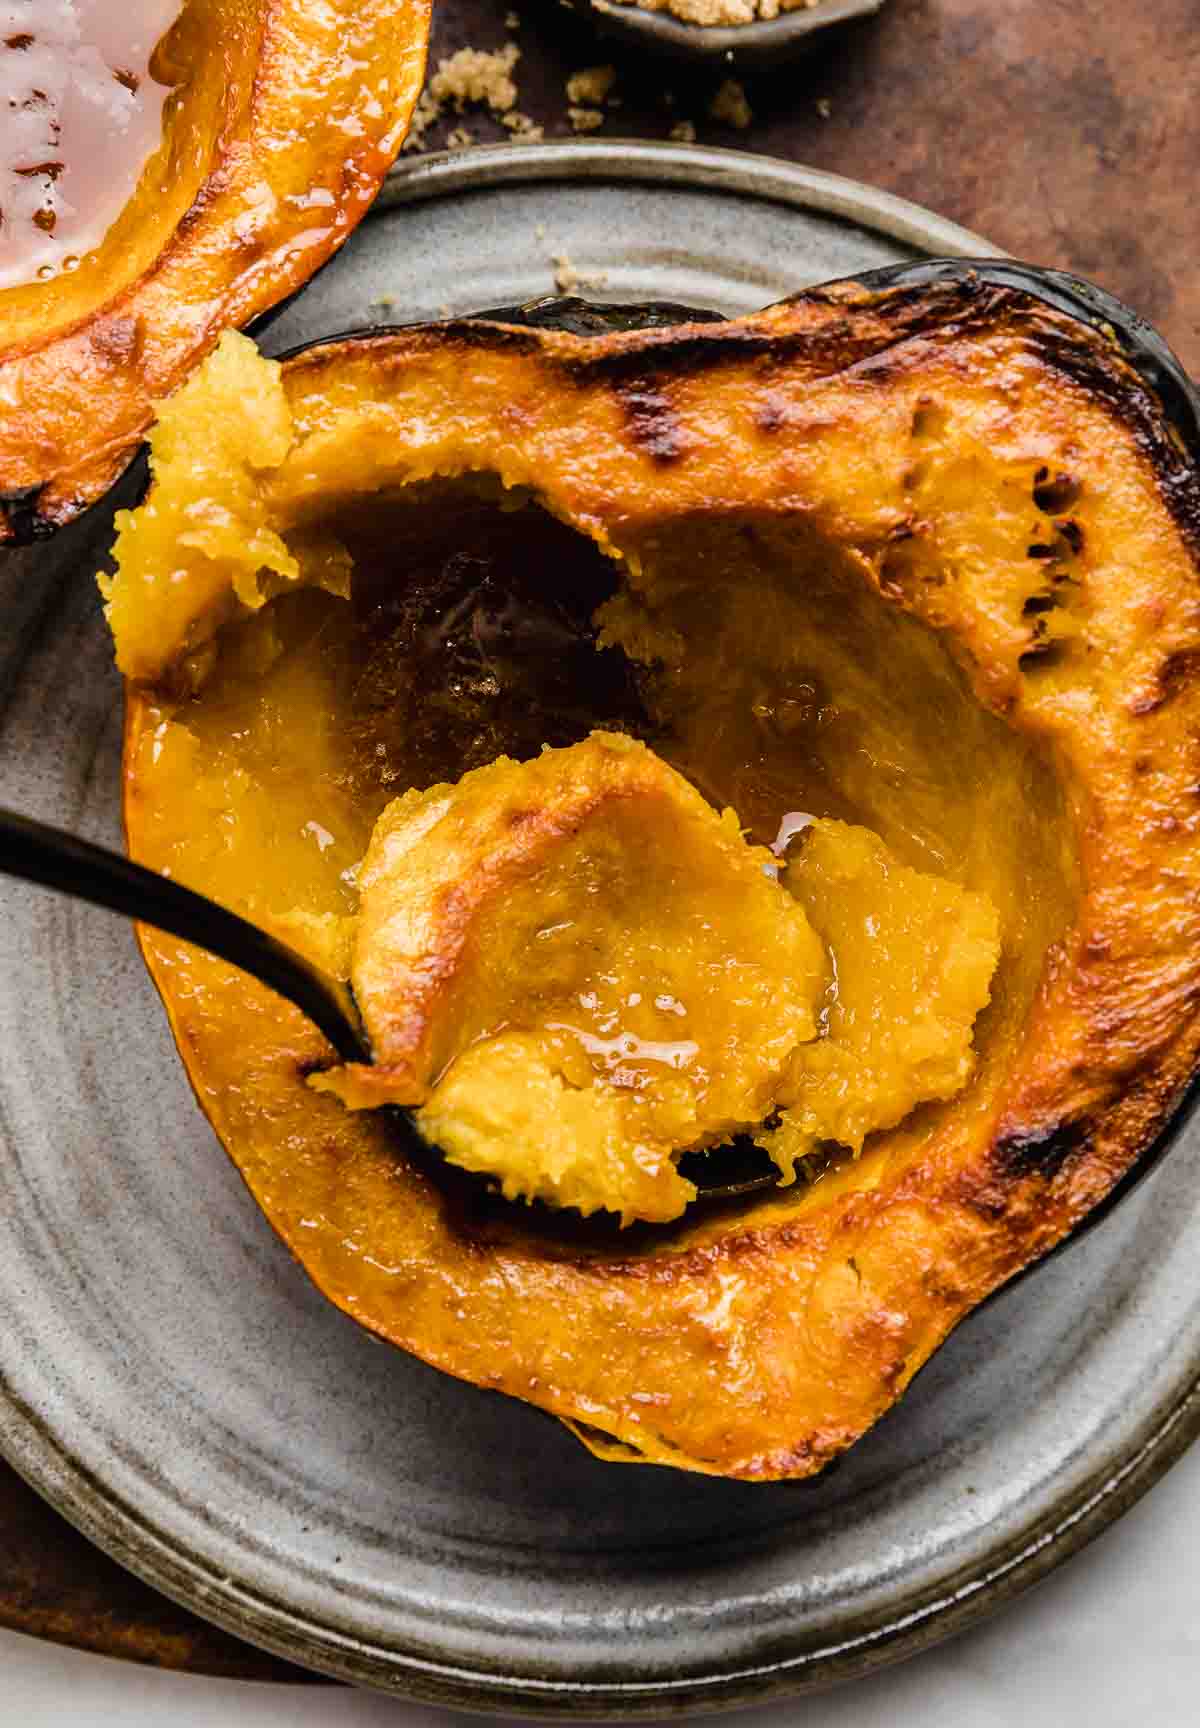 A spoon scooping out orange flesh from a bon bon winter squash with brown sugar.